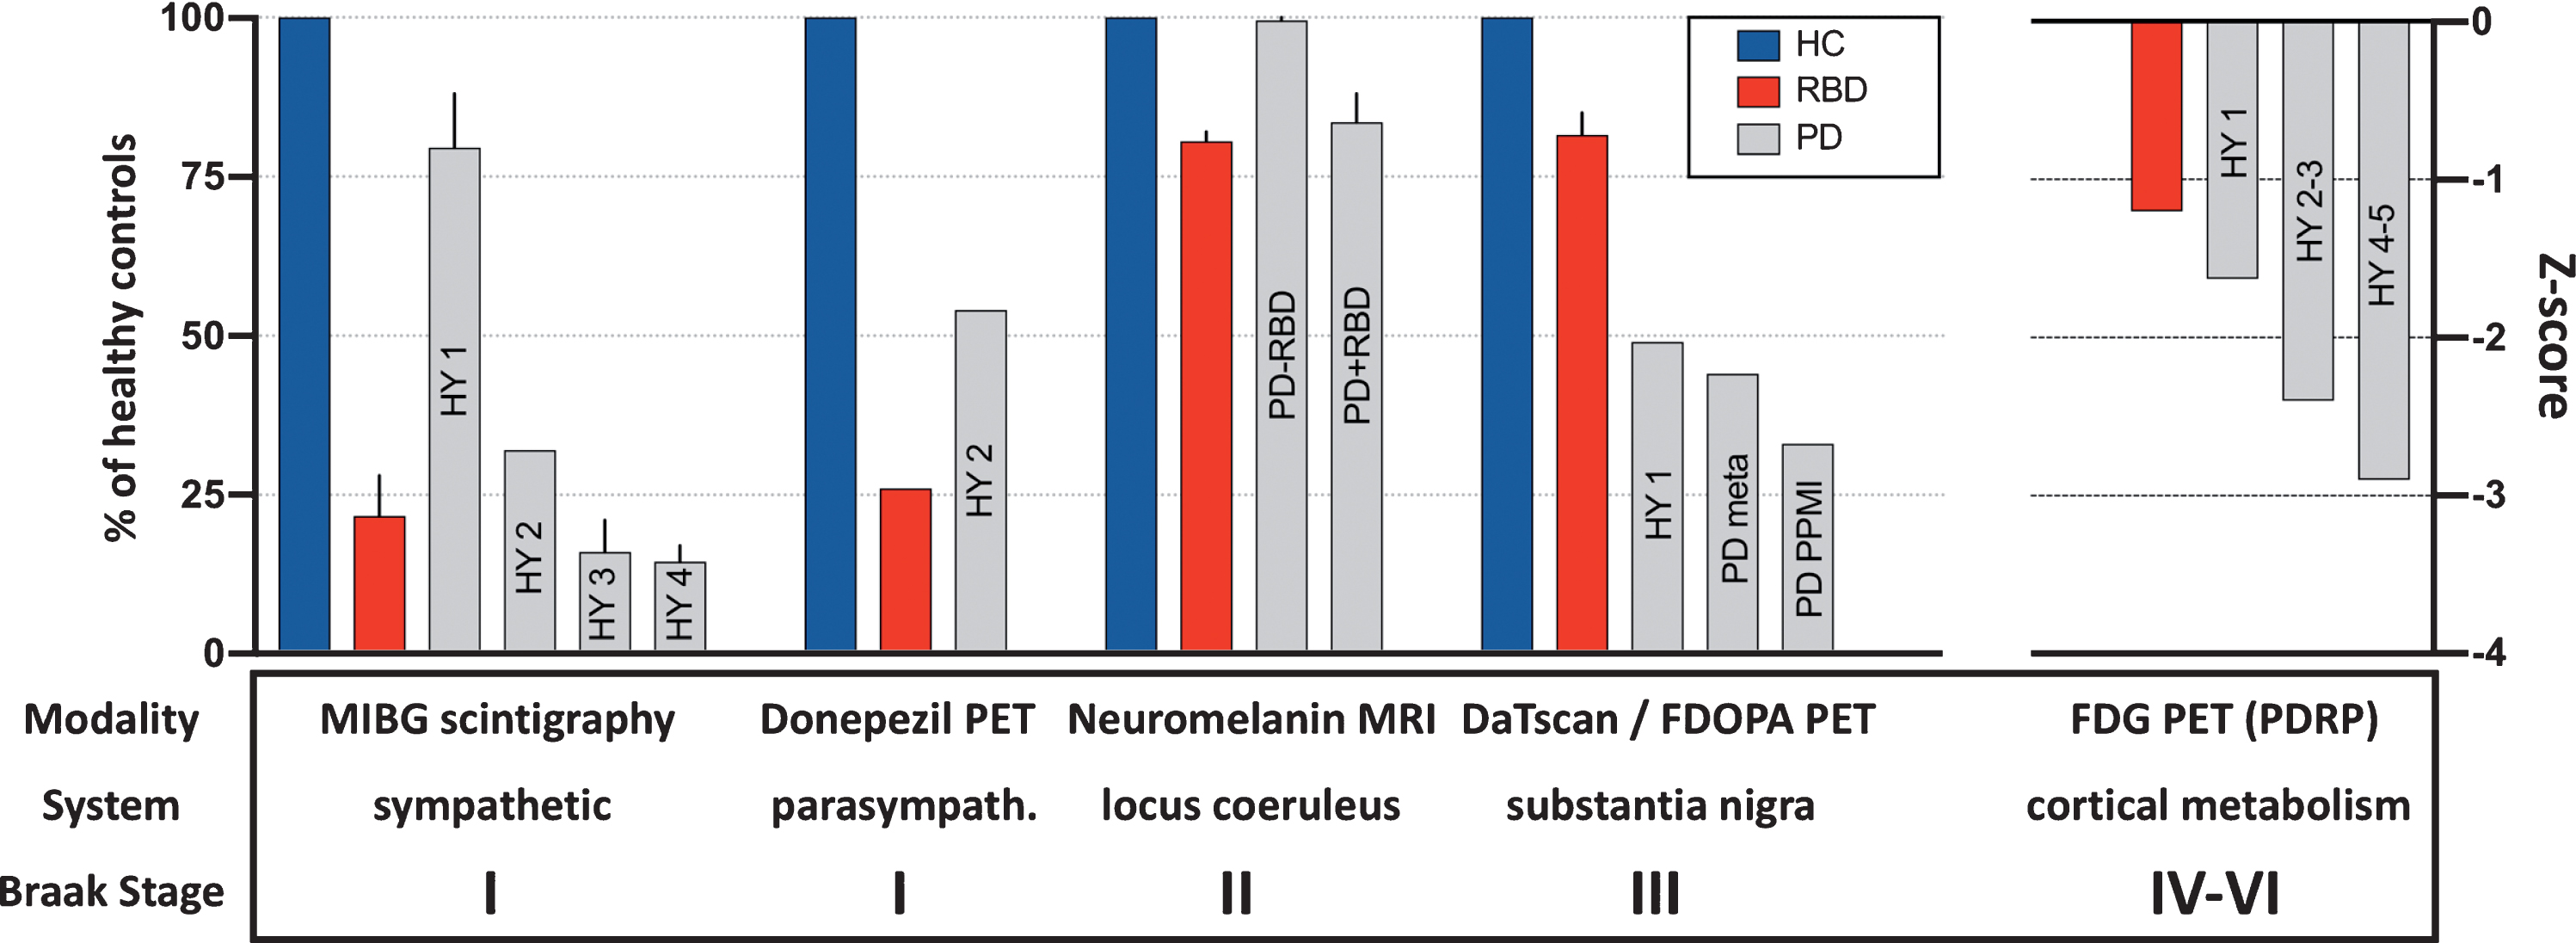 Summary of imaging modalities used to measure relevant neuronal systems. The healthy control mean (blue) was set to 100% in each study, and the percentage reduction in the patient groups calculated. In cases with more than one study, the standard deviation is depicted by whiskers. Cardiac sympathetic innervation was measured with 123I-MIBG scintigraphy; intestinal cholinergic (parasympathetic) innervation with 11C-donepezil PET; integrity of pigmented locus coeruleus neurons with neuromelanin-sensitive MRI; nigrostriatal dopaminergic synaptic function with 123I-FP-CIT SPECT or 18F-DOPA PET; cortical glucose metabolism with 18F-FDG and principal component analysis to quantify the PD related network (PDRP) z-score. The corresponding Braak stages are shown in the bottom row. Patients with idiopathic RBD (red) show marked loss of autonomic and locus coeruleus imaging parameters, but only minor dopaminergic terminal loss and only slight perturbation of cortical metabolism. The opposite pattern is seen for H&Y stage I-II PD patients. Concerning annotations to PD data: “HY” shows data from different H&Y stage data sets; “PD meta” shows the mean % reduction in PD patients’ DaTscan putamen binding from a metaanalysis [31], and “PD PPMI” the % putaminal reduction seen in early PD patients from the PPMI data set [35]. [Note that except for PDRP z-scores, the imaging parameters approximate loss of specific binding, i.e. heart/mediastinum ratio – 1 for MIBG; SUV – 1 for donepezil; locus coeruleus/pons – 1 for neuromelanin MRI; putamen/occipital cortex – 1 for FP-CIT & FDOPA. For didactic purposes the PDRP z-scores are listed as negative in this figure in contrast to common practice. See main text for study references.]